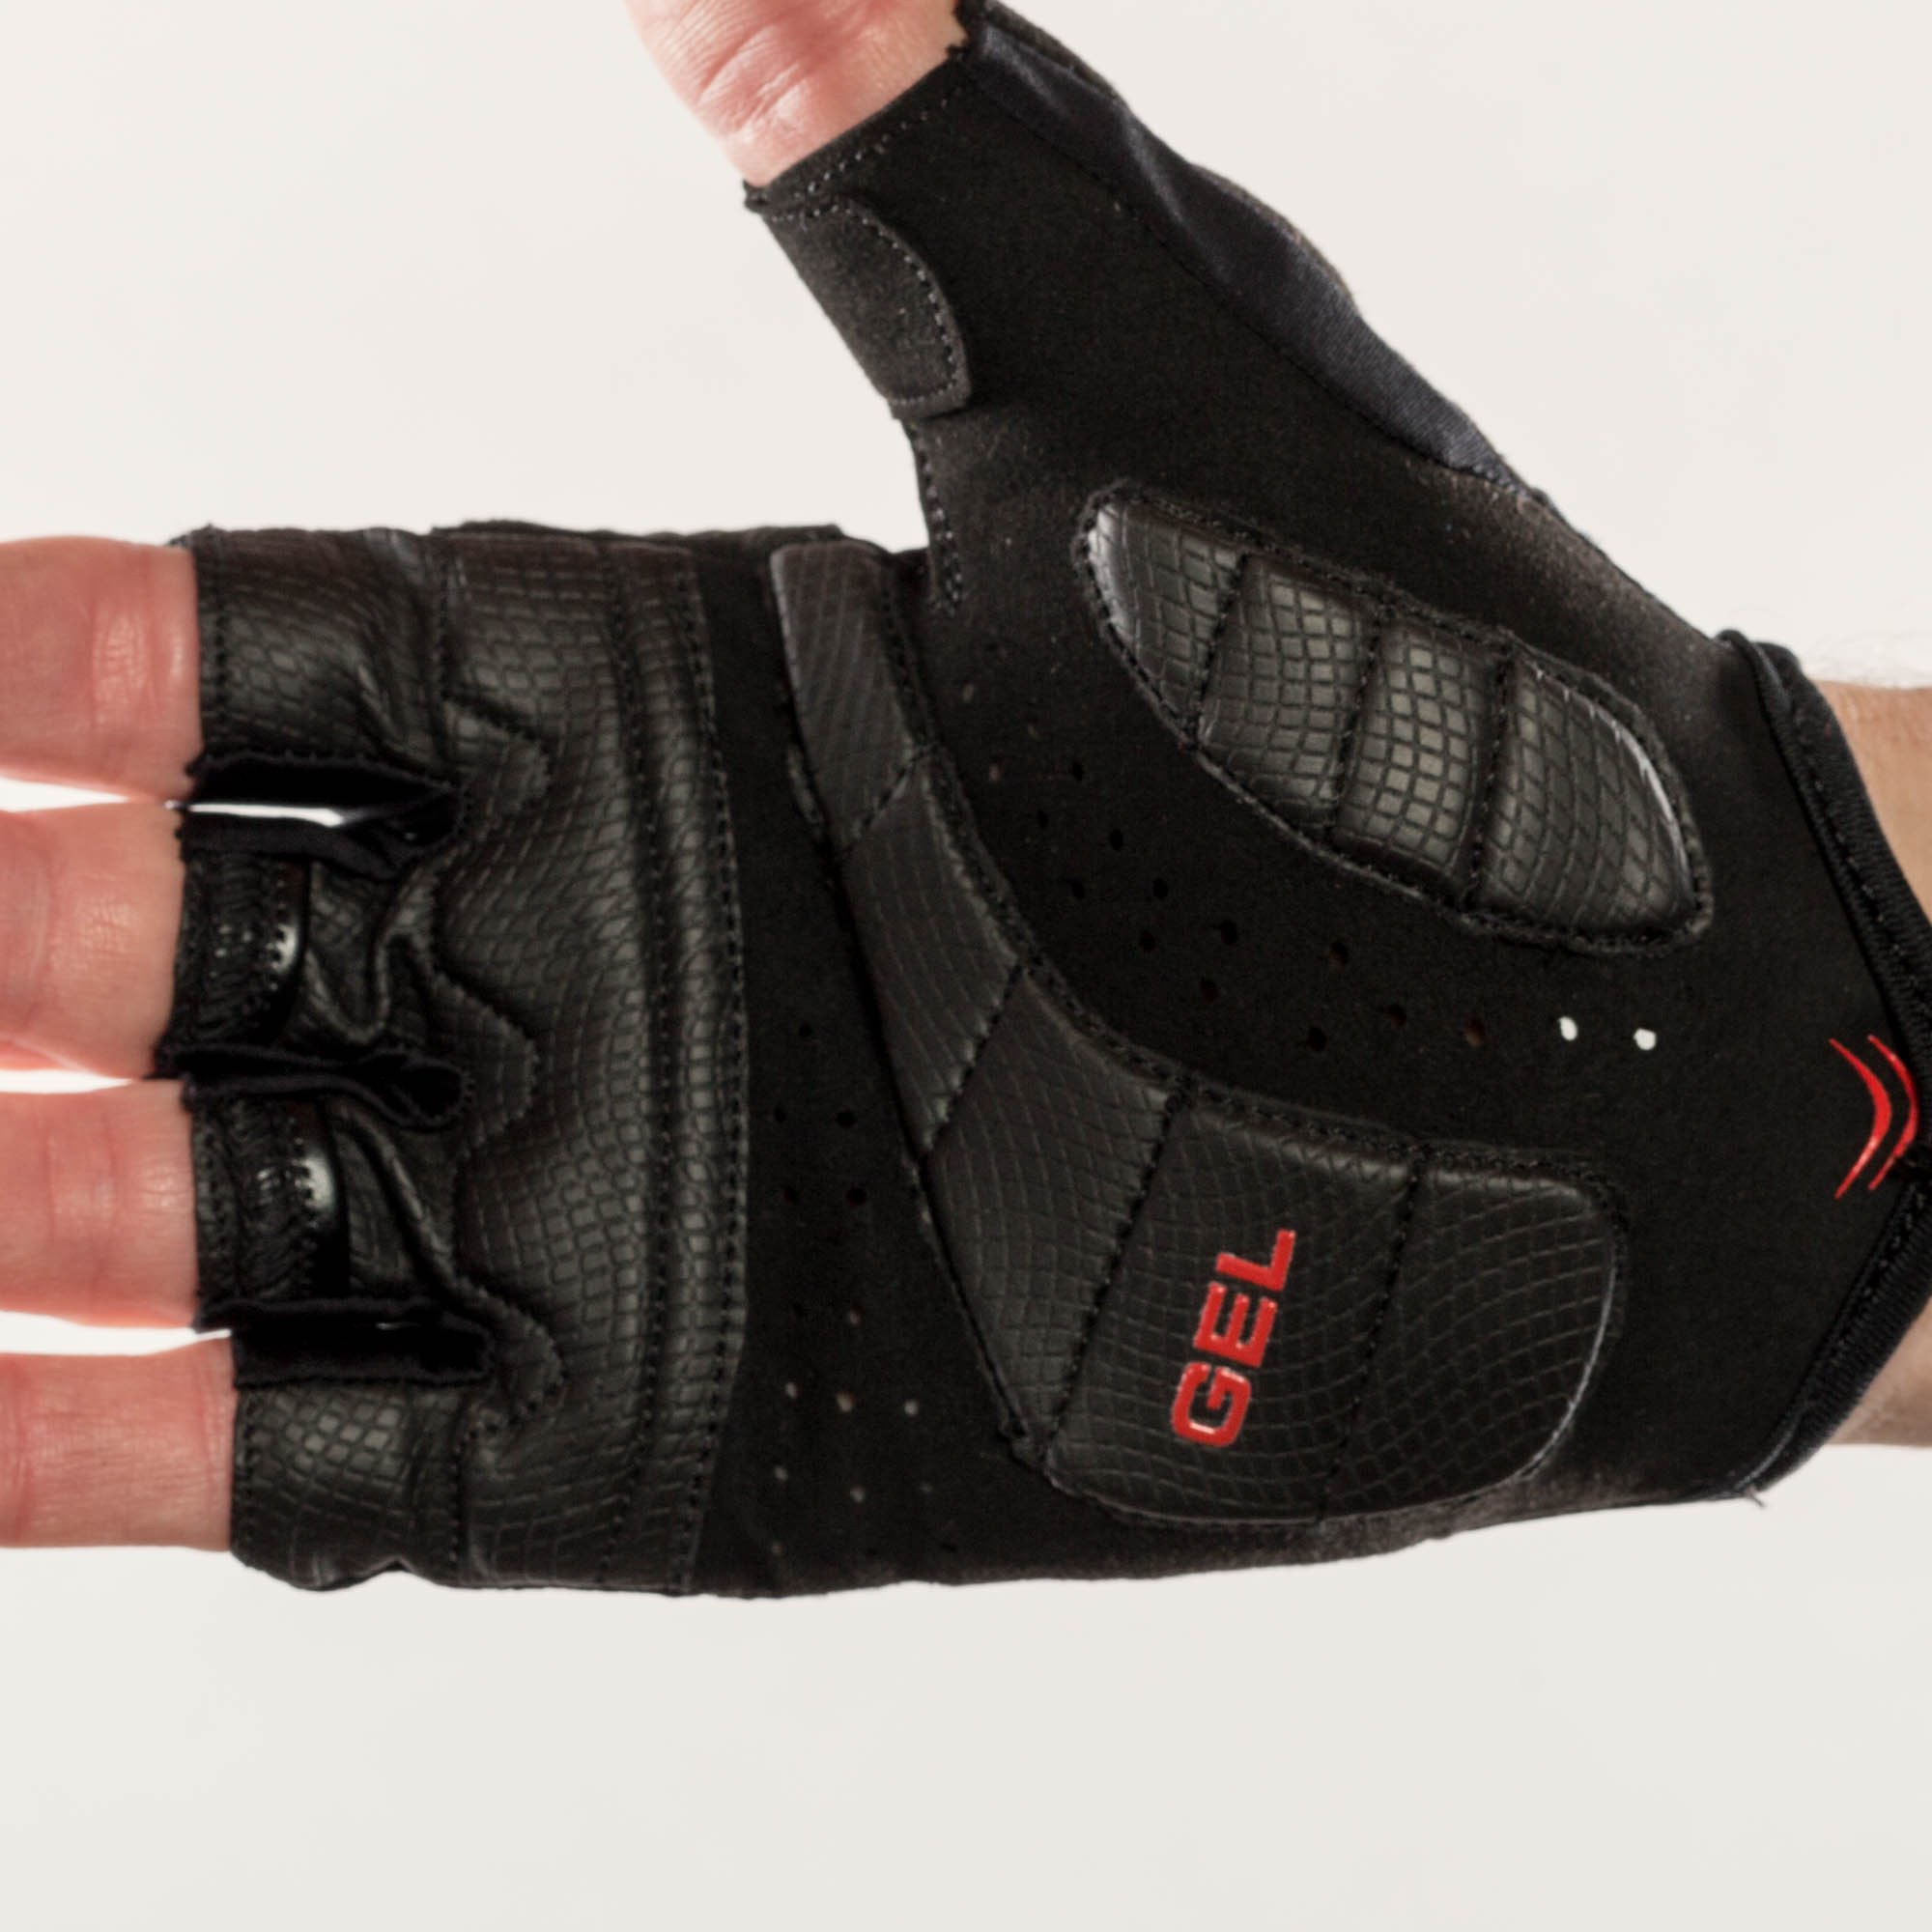 Guantes Pursuit GEL Negro Bellwether para ciclista